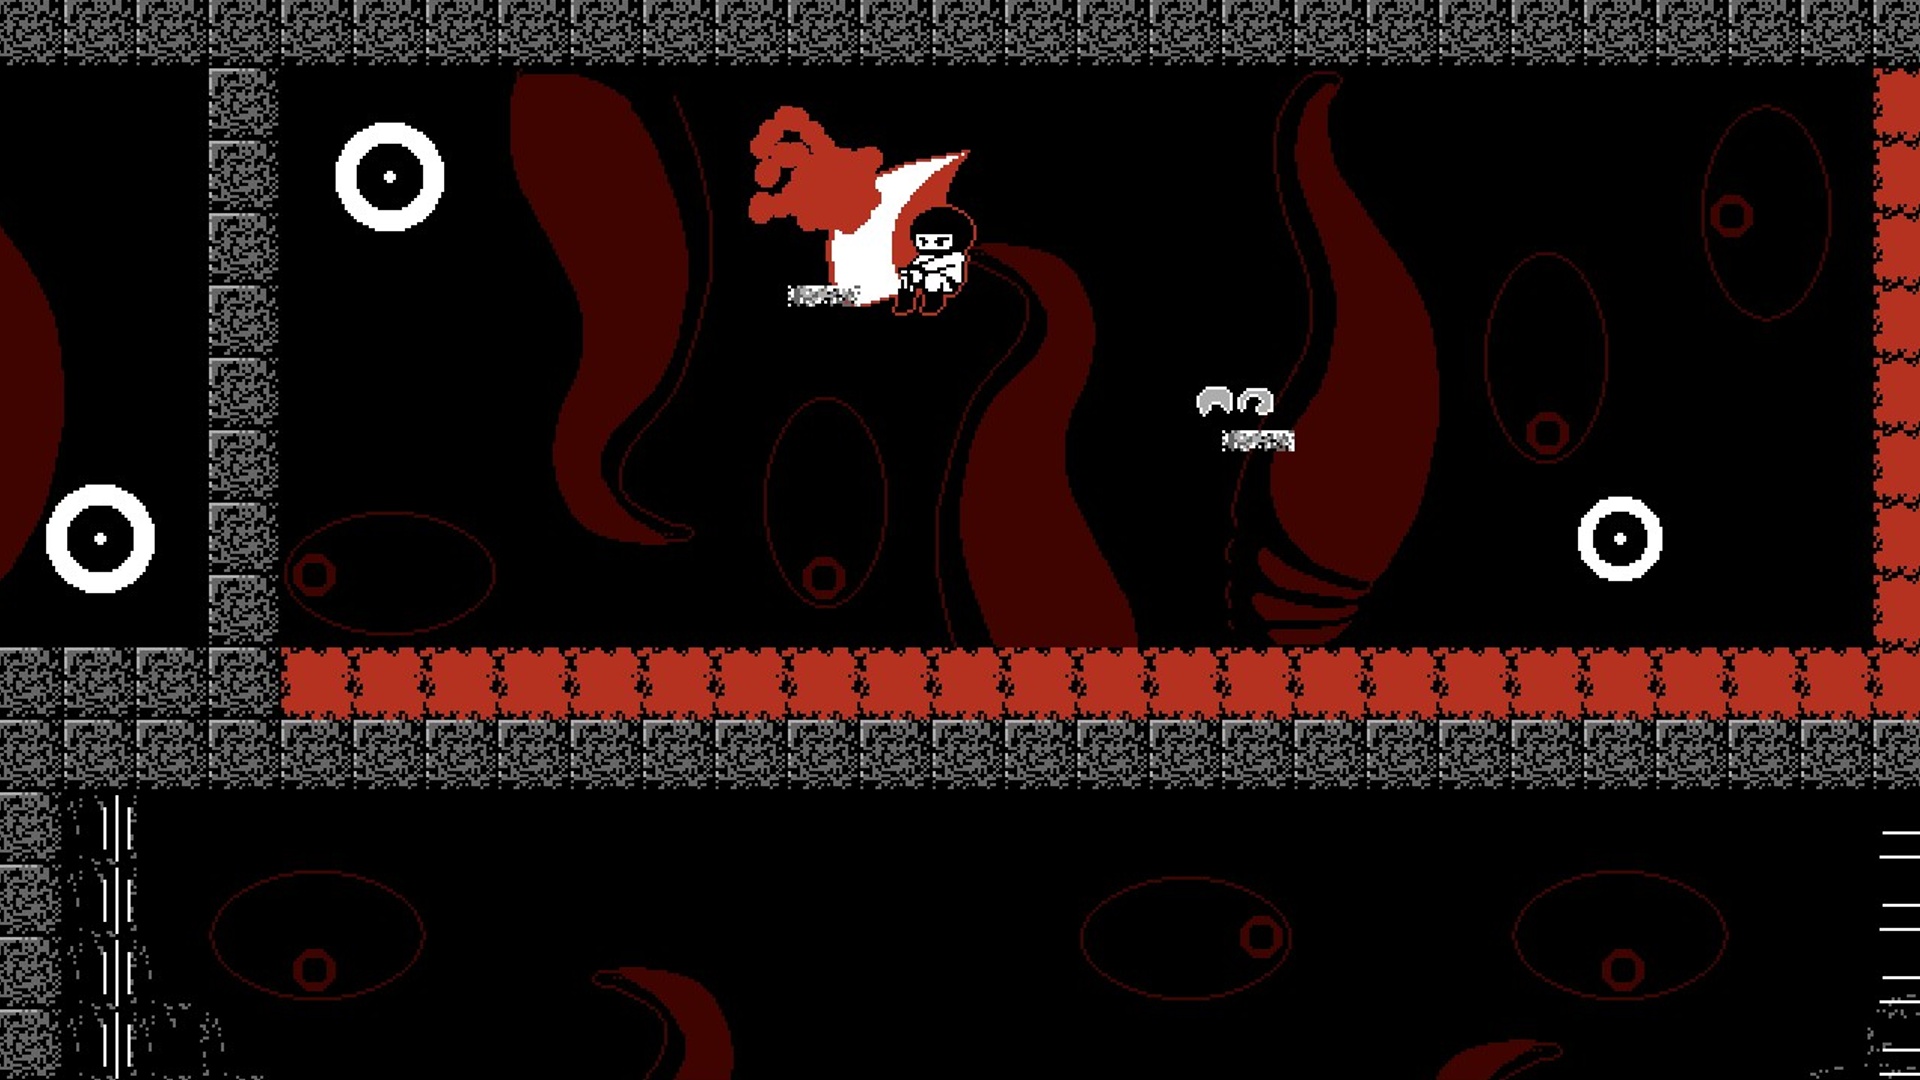 Slicing an enemy in mid-air as the Ninja leaps to the next platform.